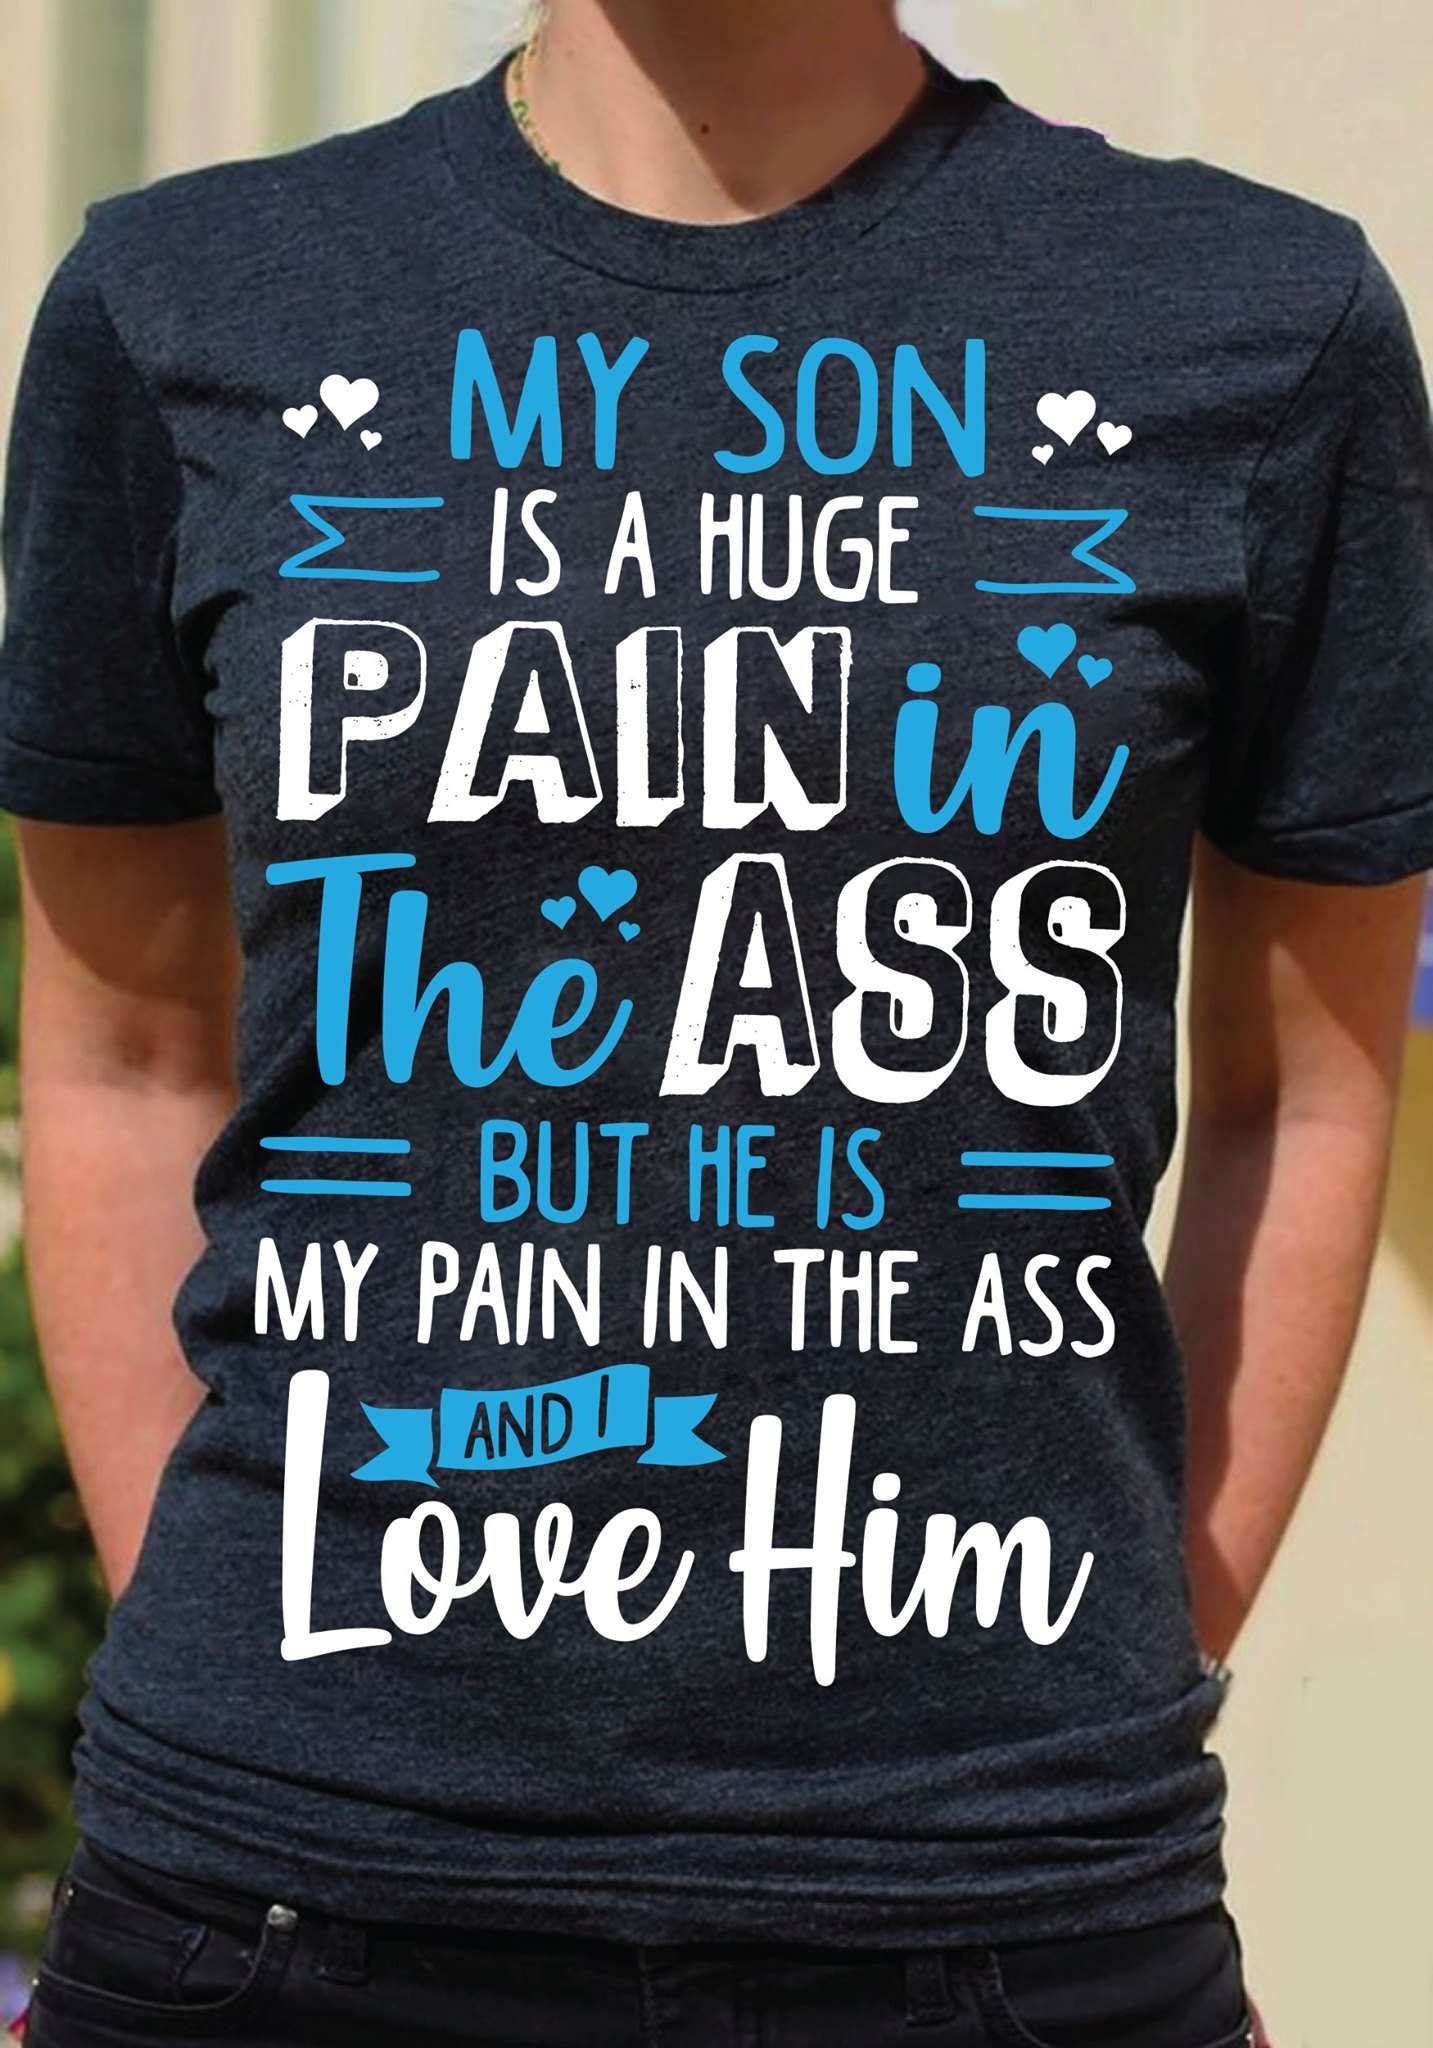 My son is huge pain in the ass but he is my pain in the ass and i love him